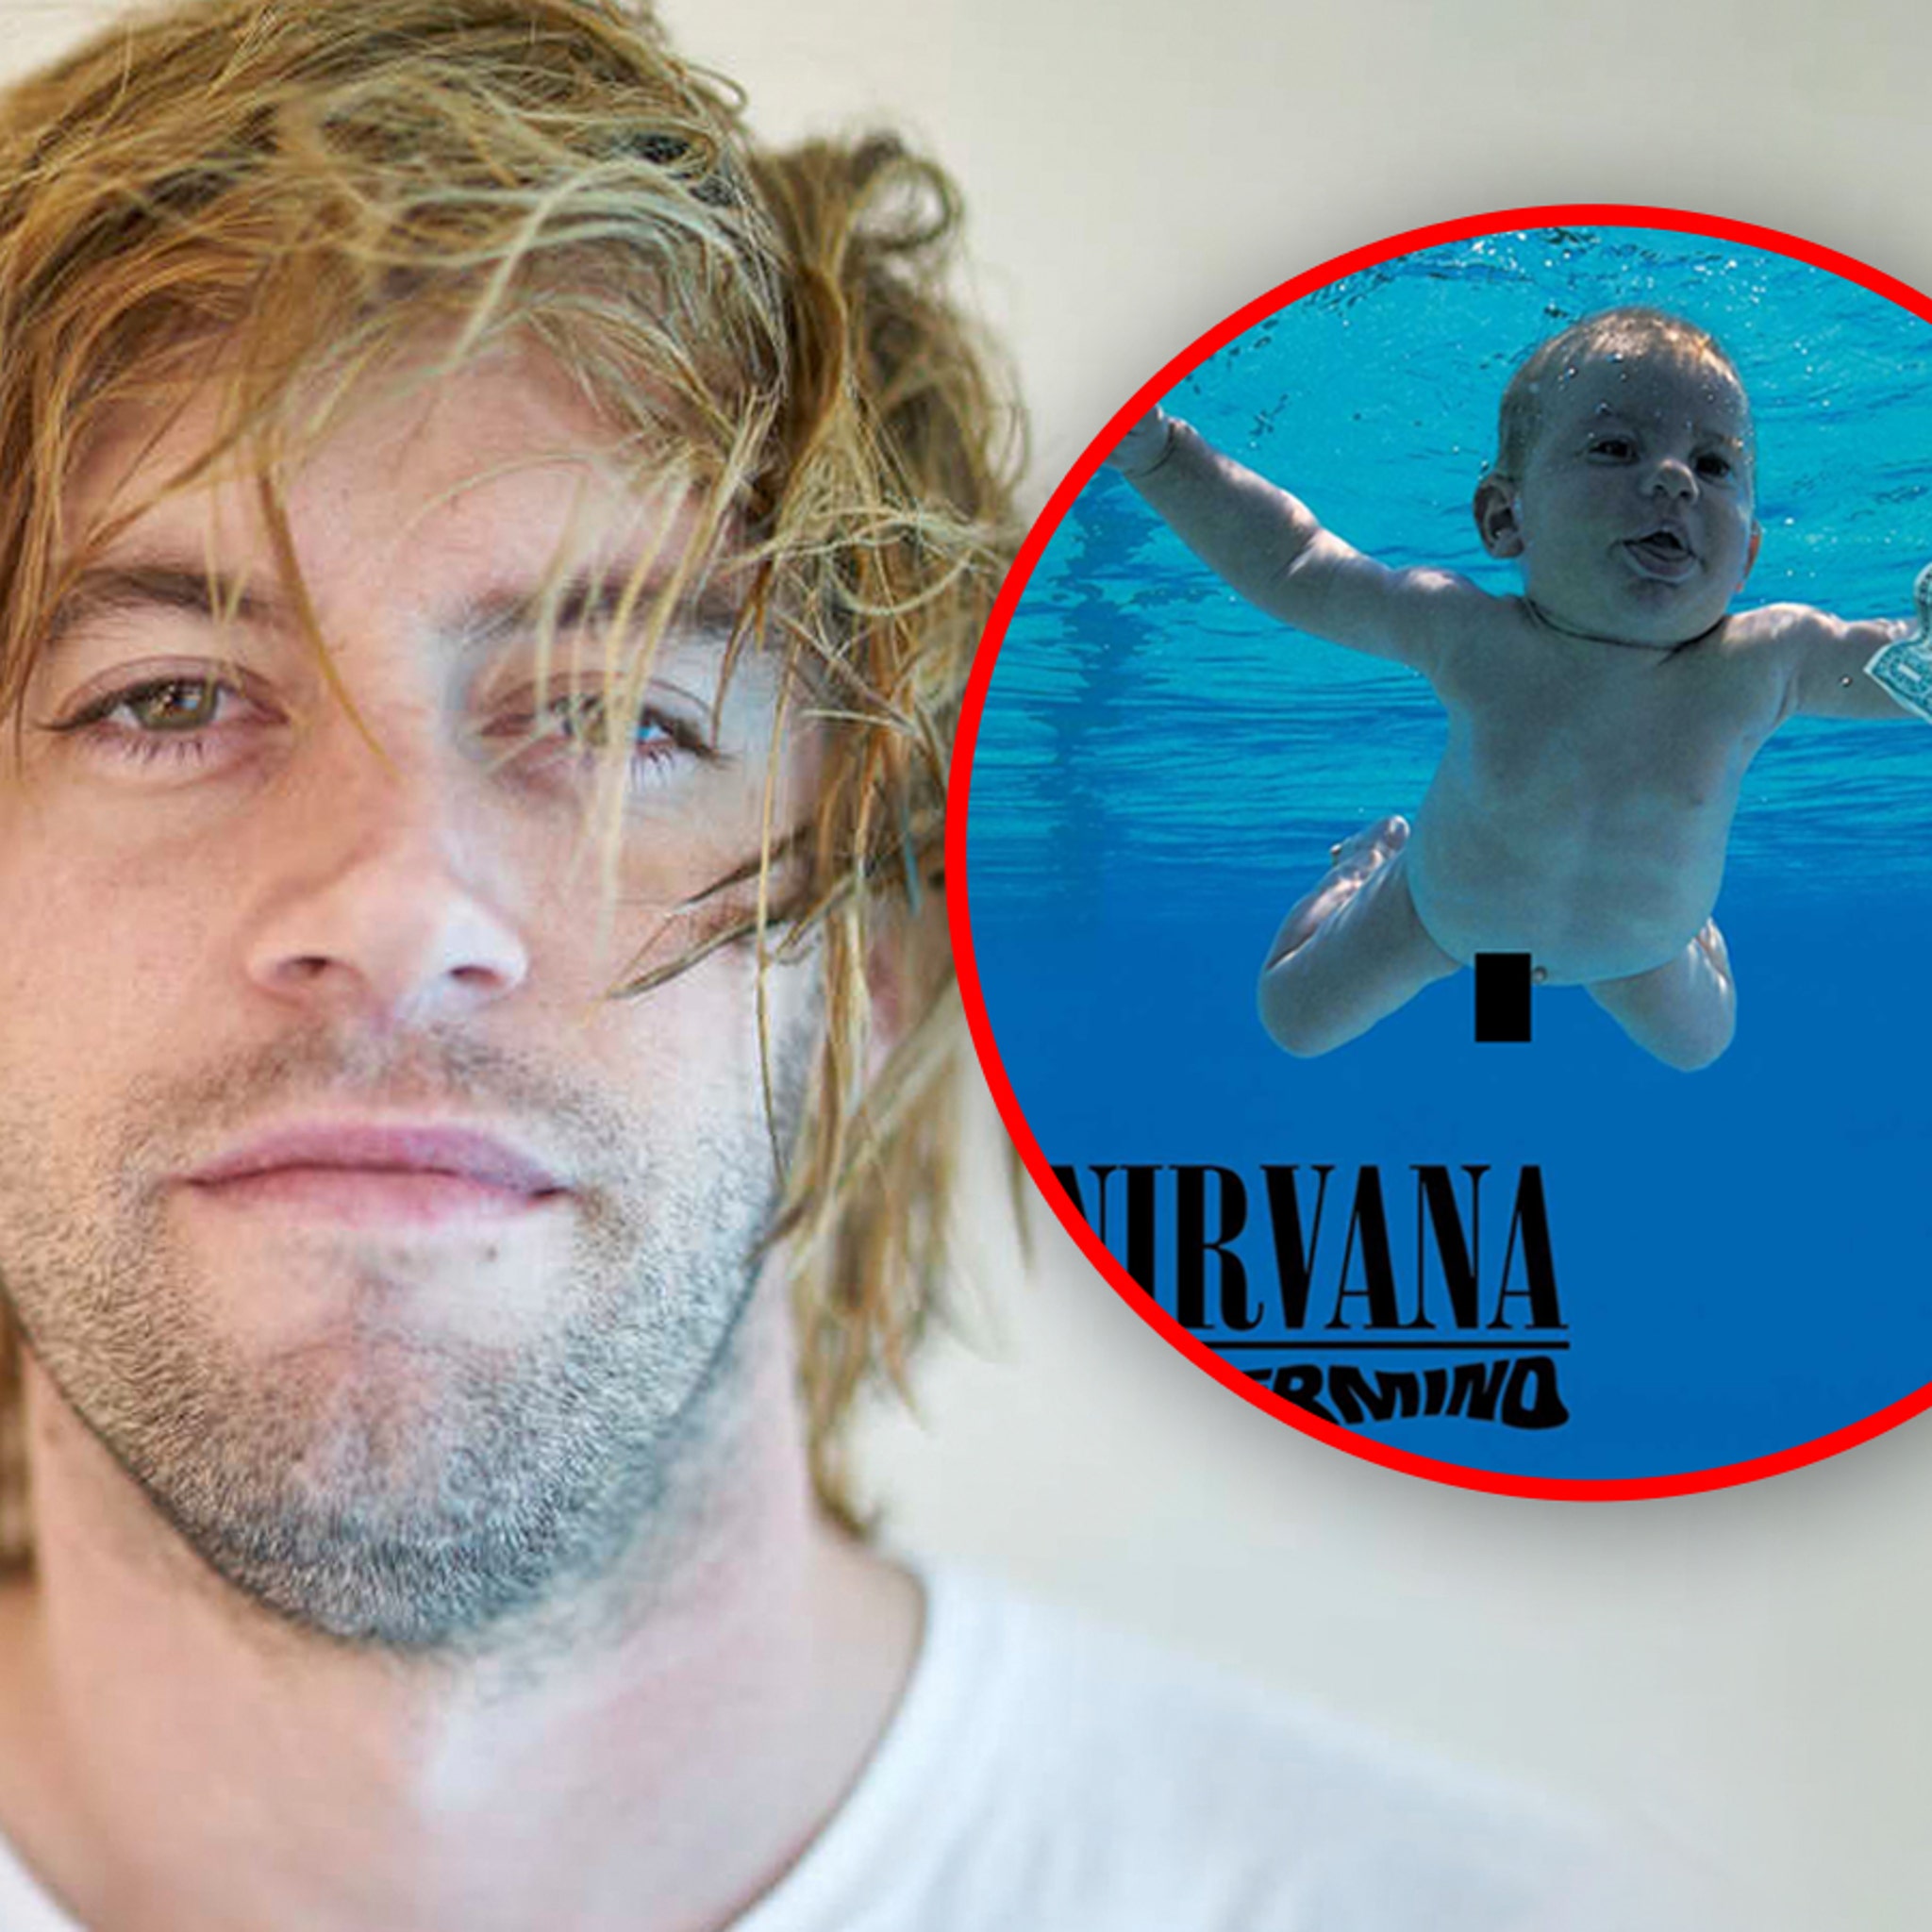 Nirvana 'Nevermind' album cover lawsuit revived by federal court